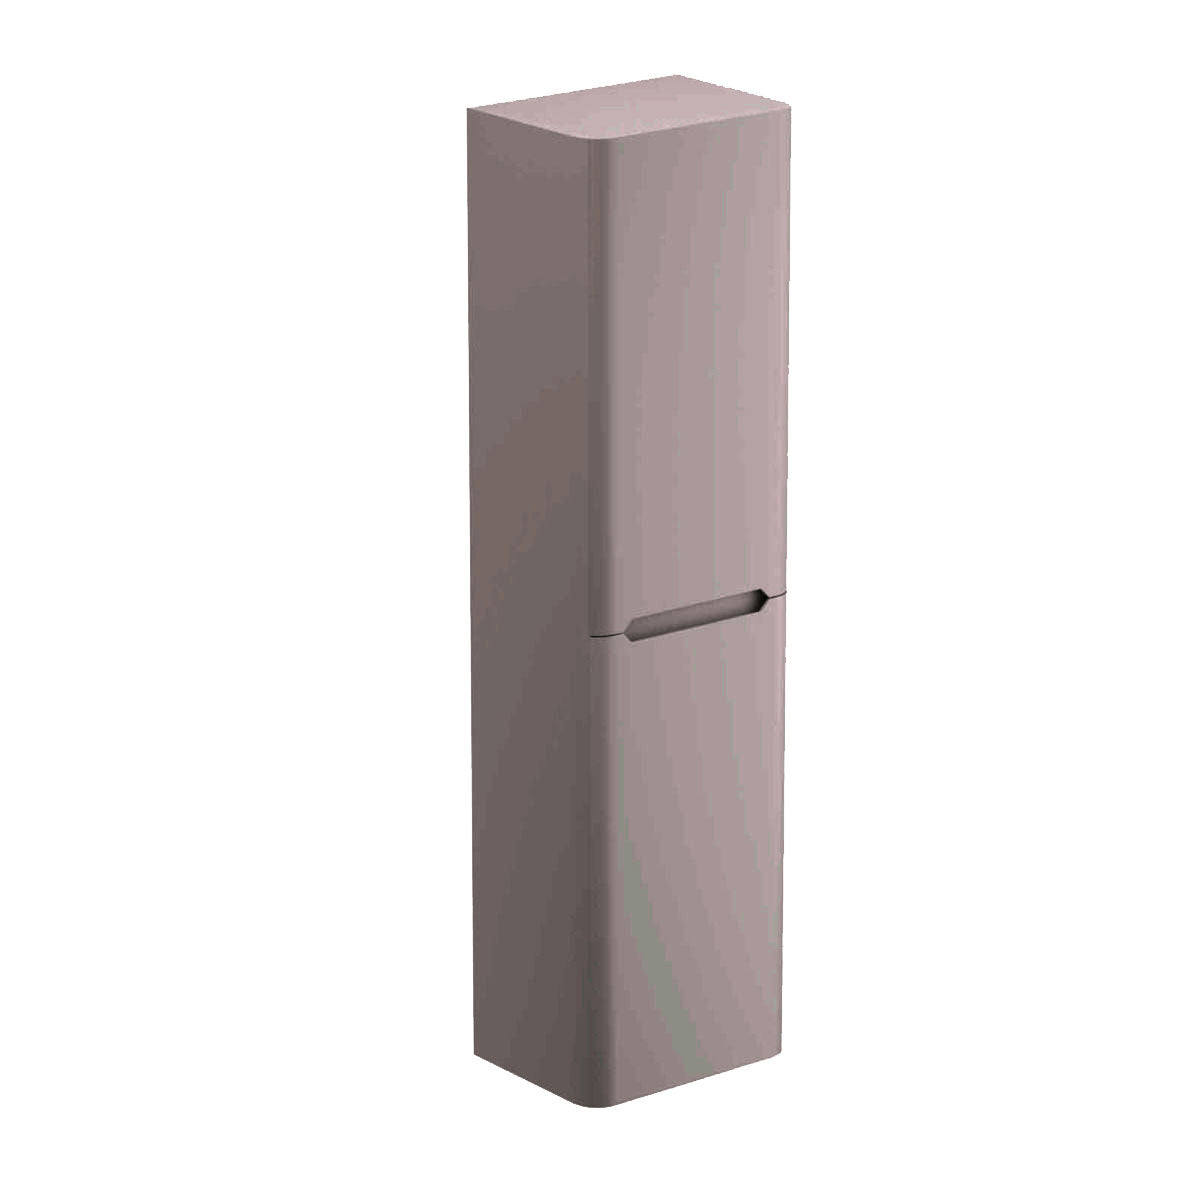 Granlusso™ Enzo Tall Storage Cabinet Wall Mounted light grey